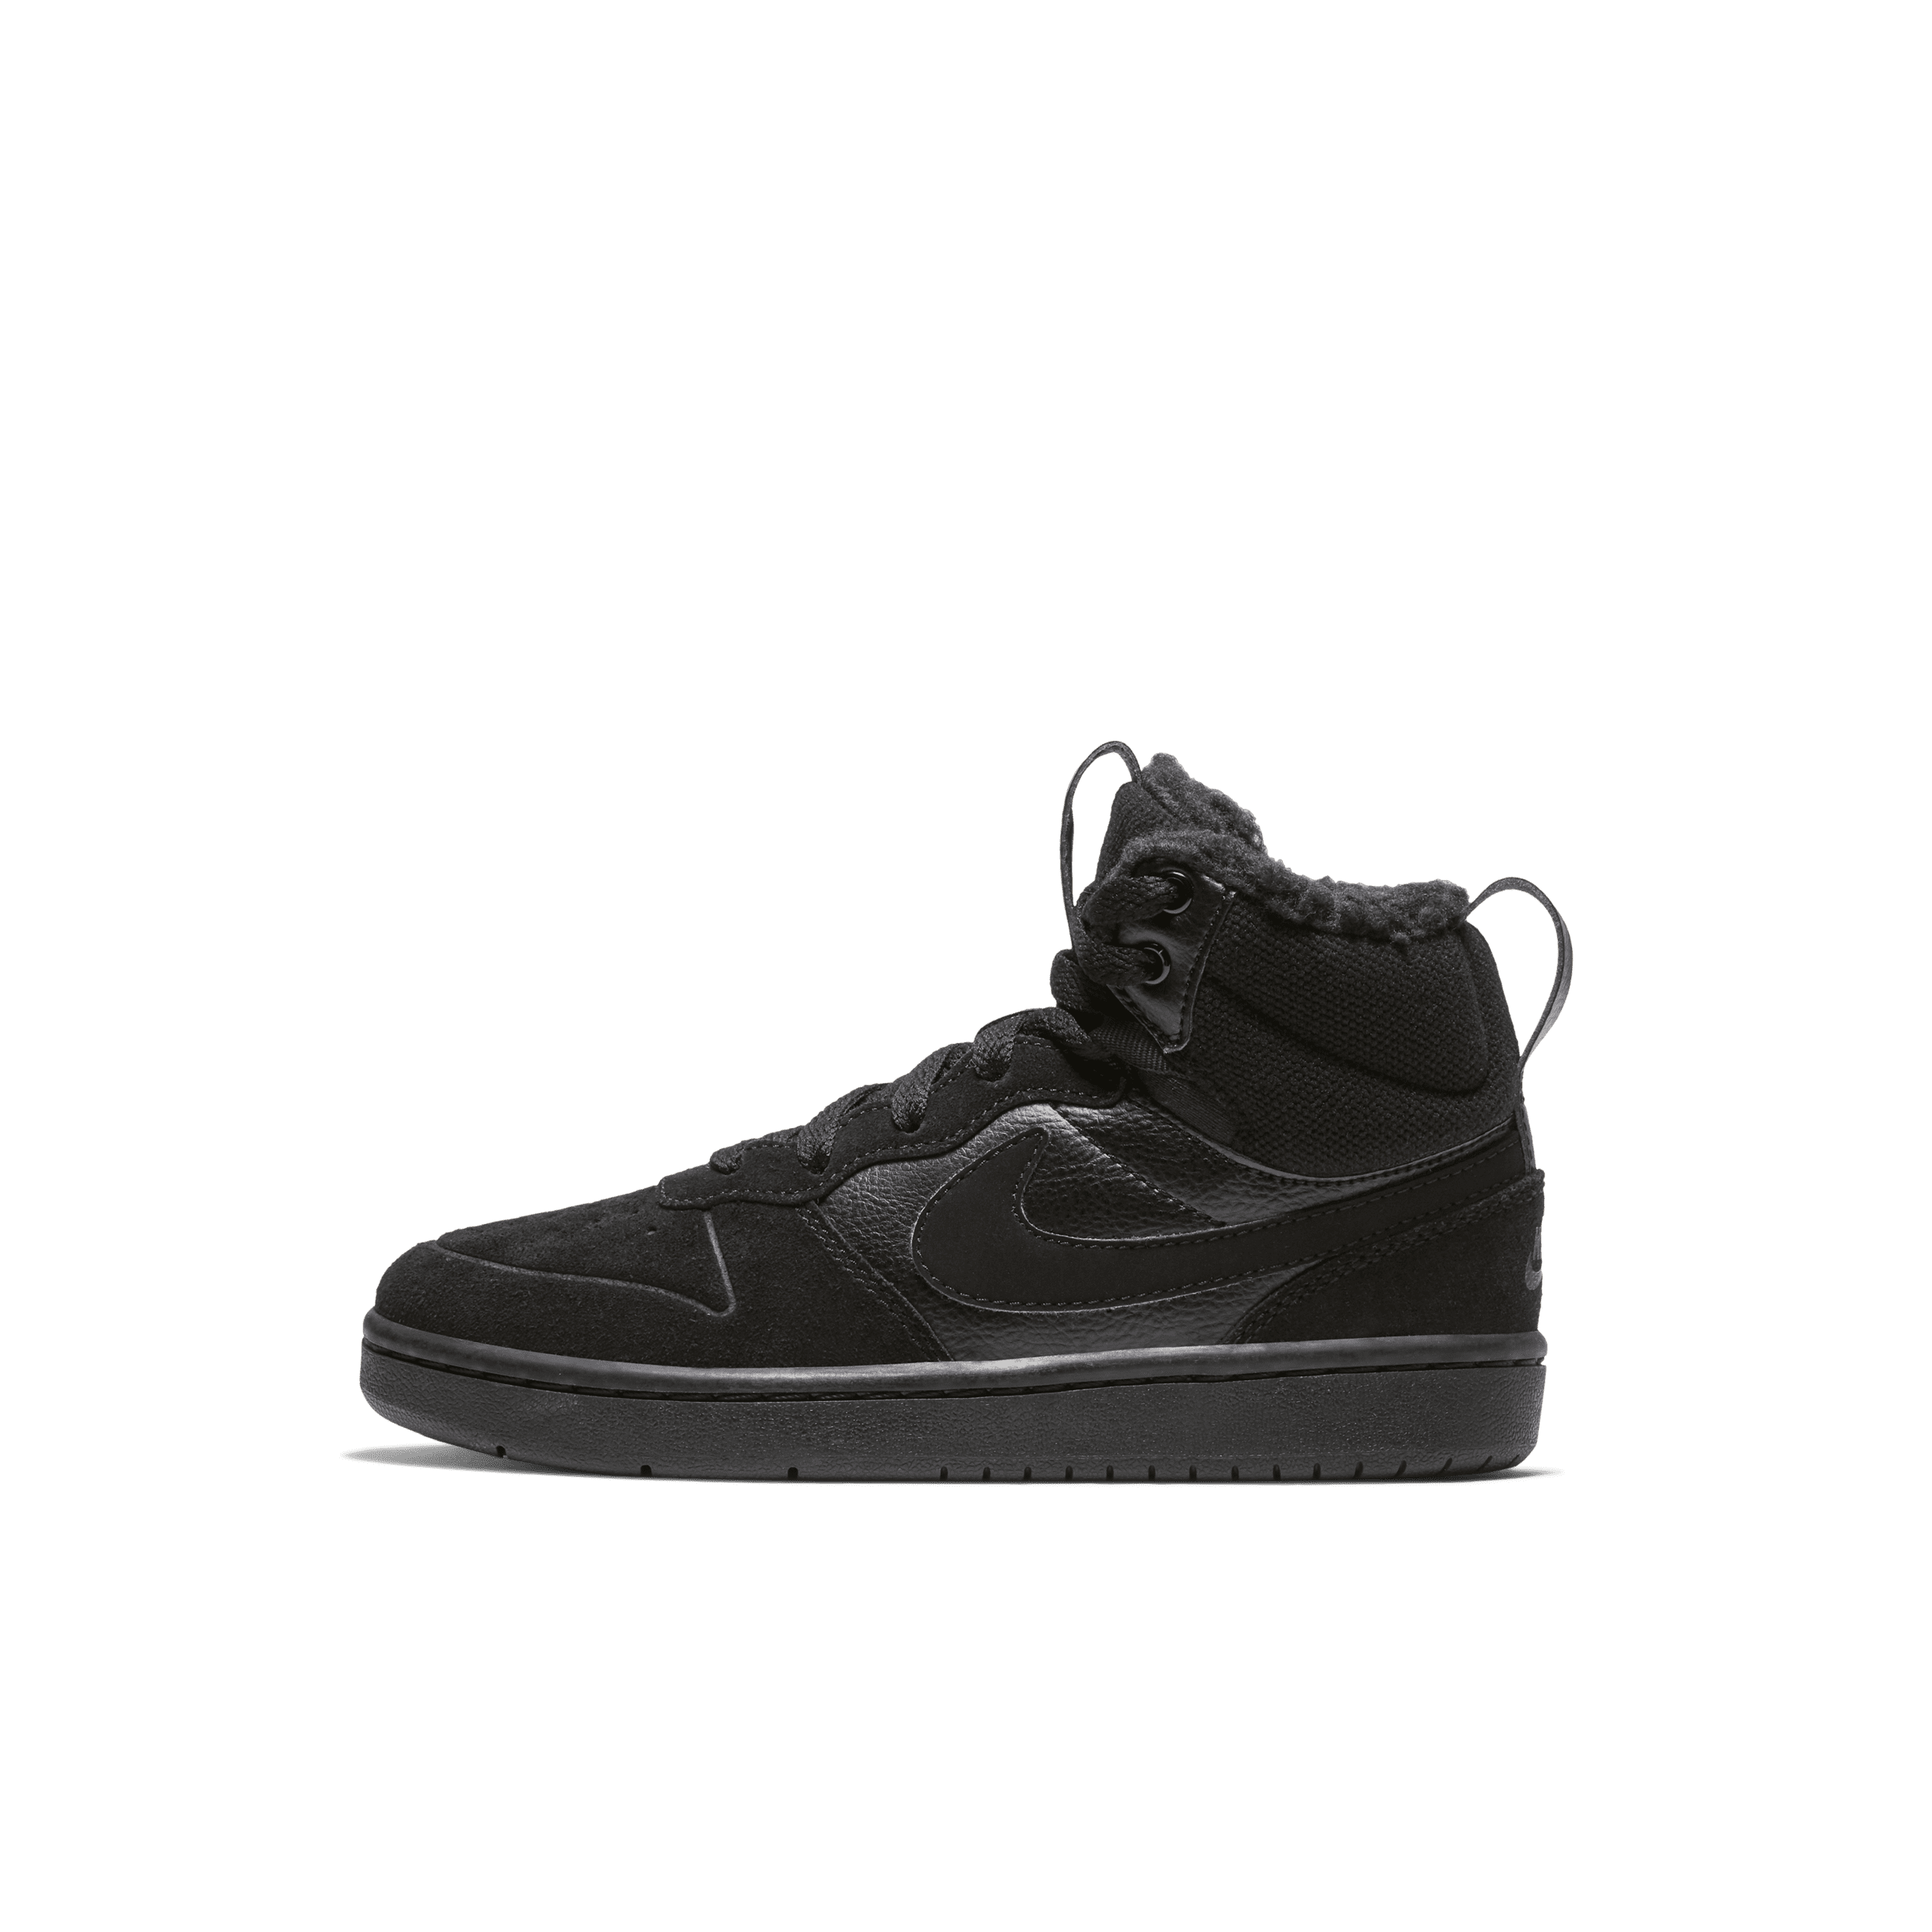 Nike Court Borough Mid 2 Younger Kids' Boot - Black